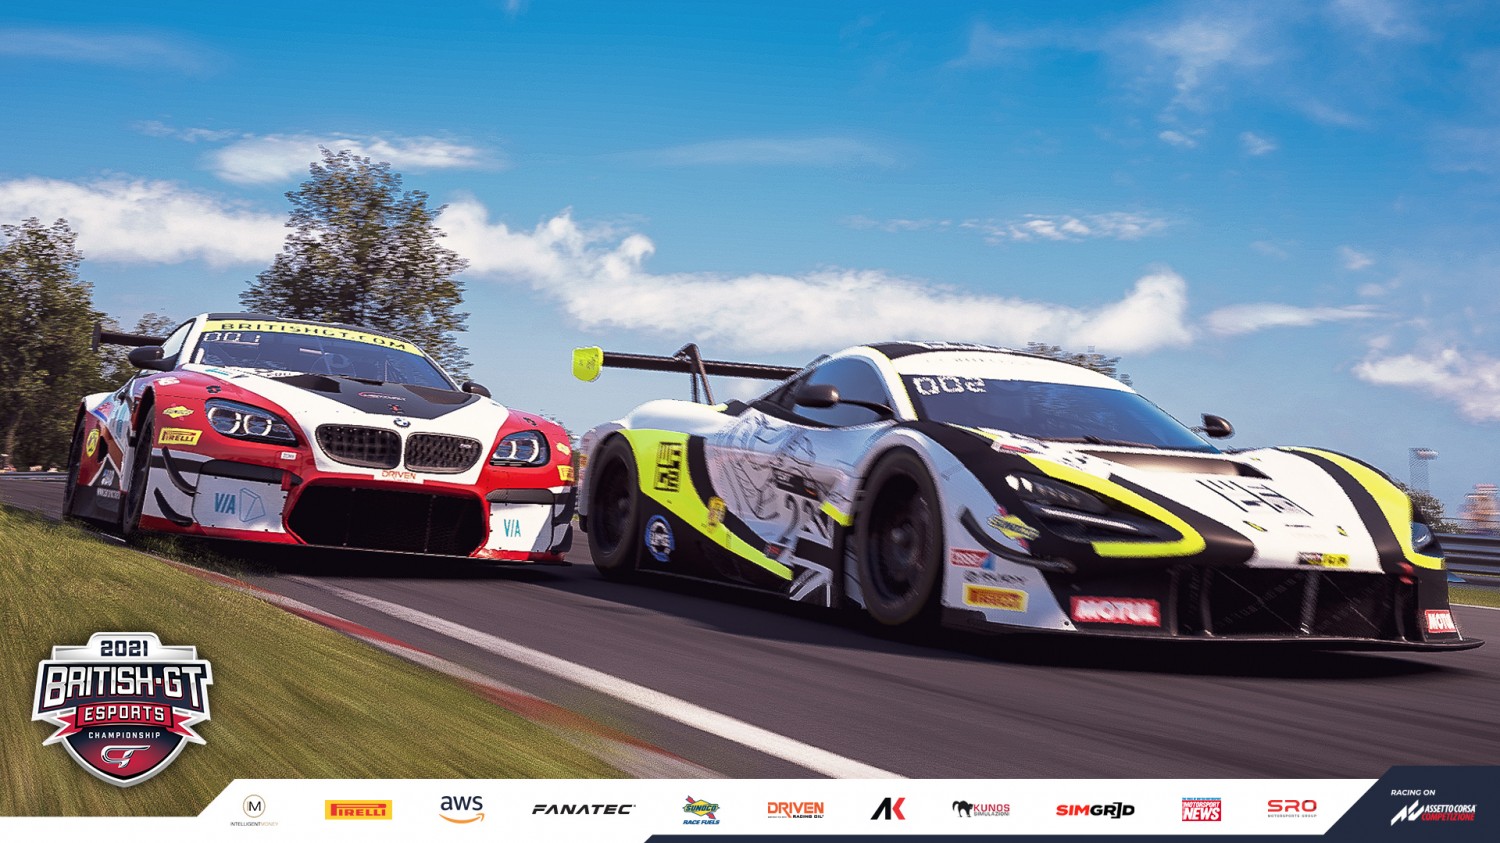 Esports Preview: Sim racers ready for Round 2 at Snetterton this Sunday